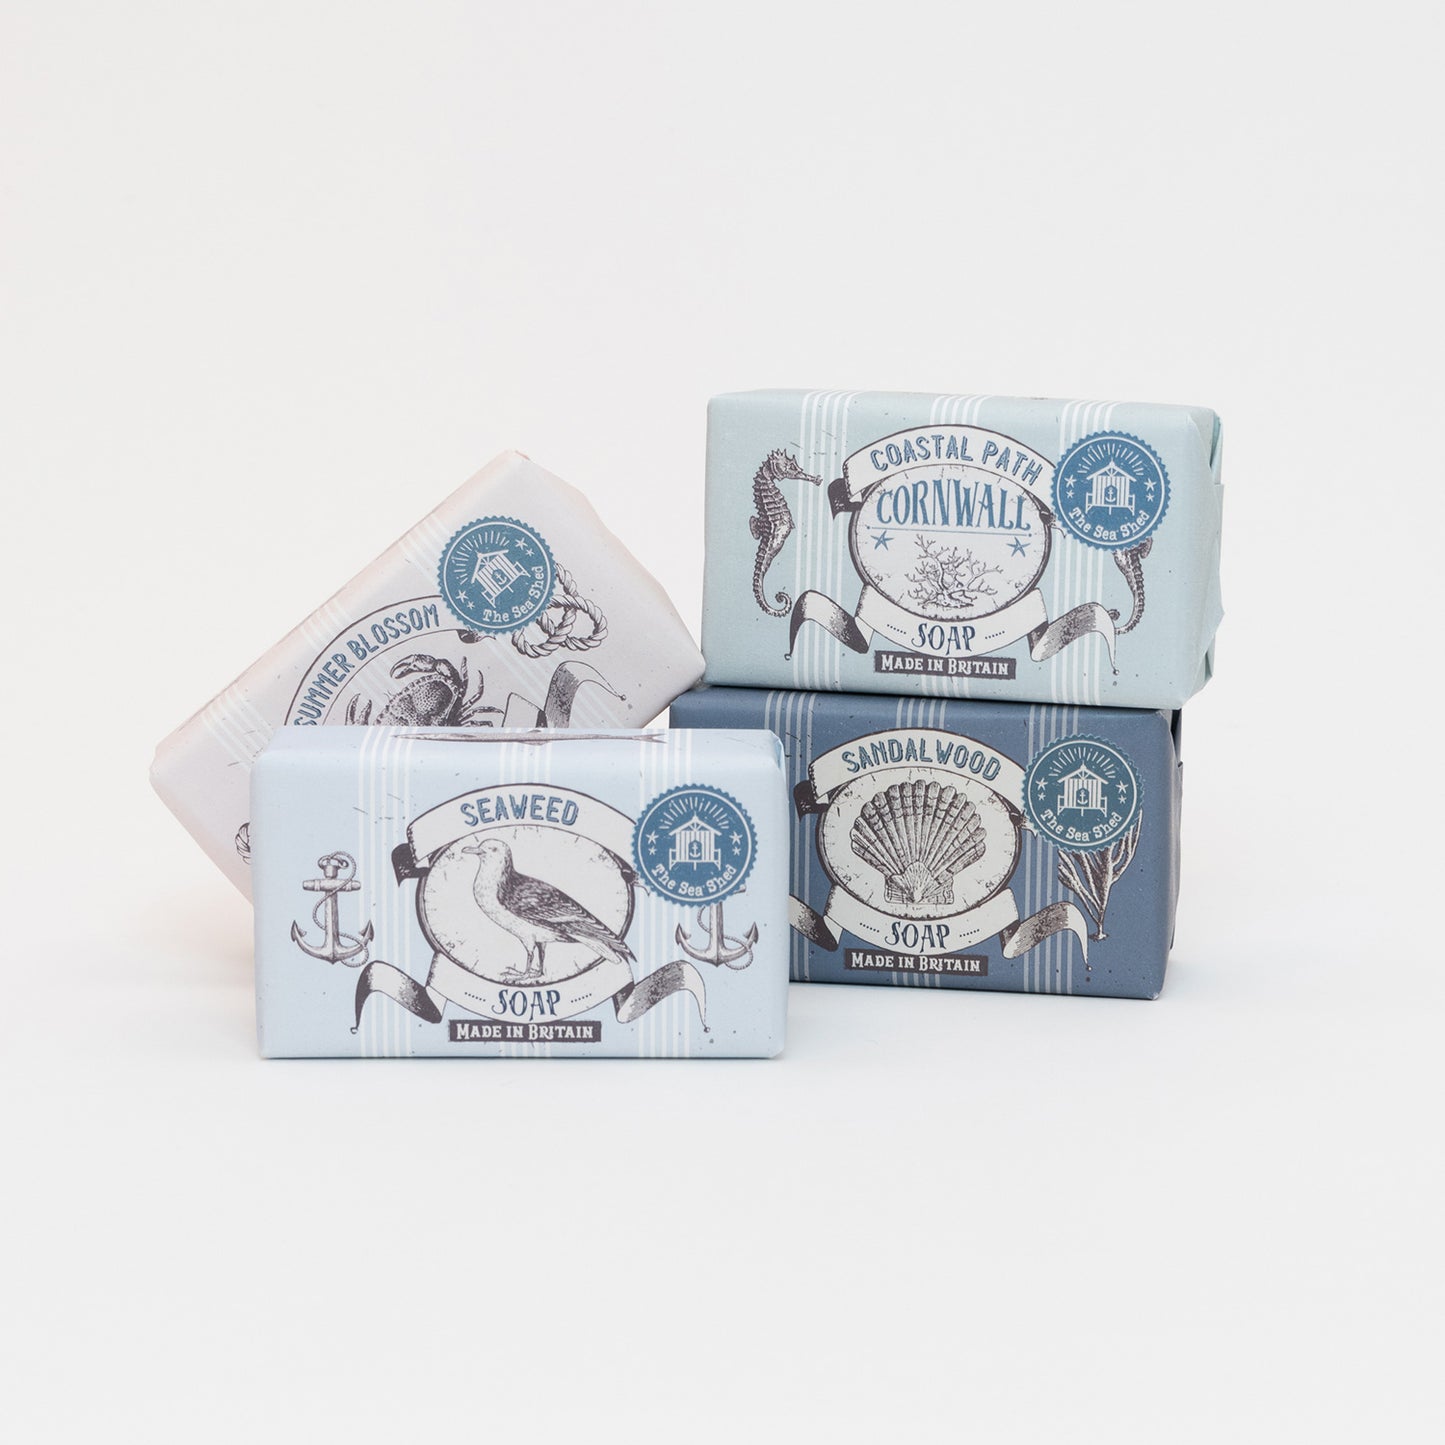 Four soap variants stacked together on a white background: Seaweed, Sandalwood, Coastal Path, and Summer Blossom.